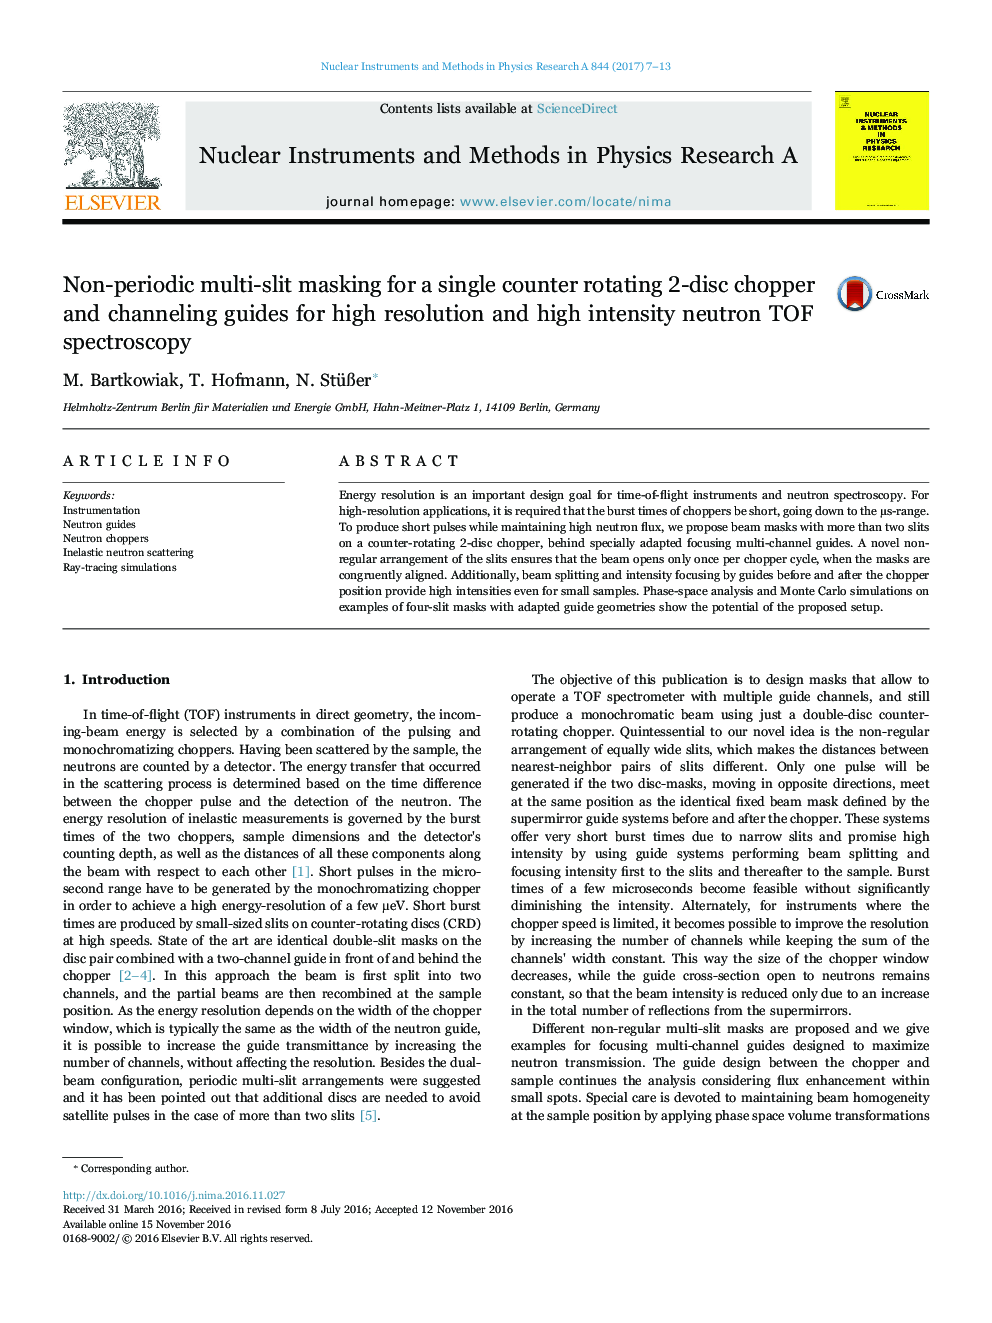 Non-periodic multi-slit masking for a single counter rotating 2-disc chopper and channeling guides for high resolution and high intensity neutron TOF spectroscopy